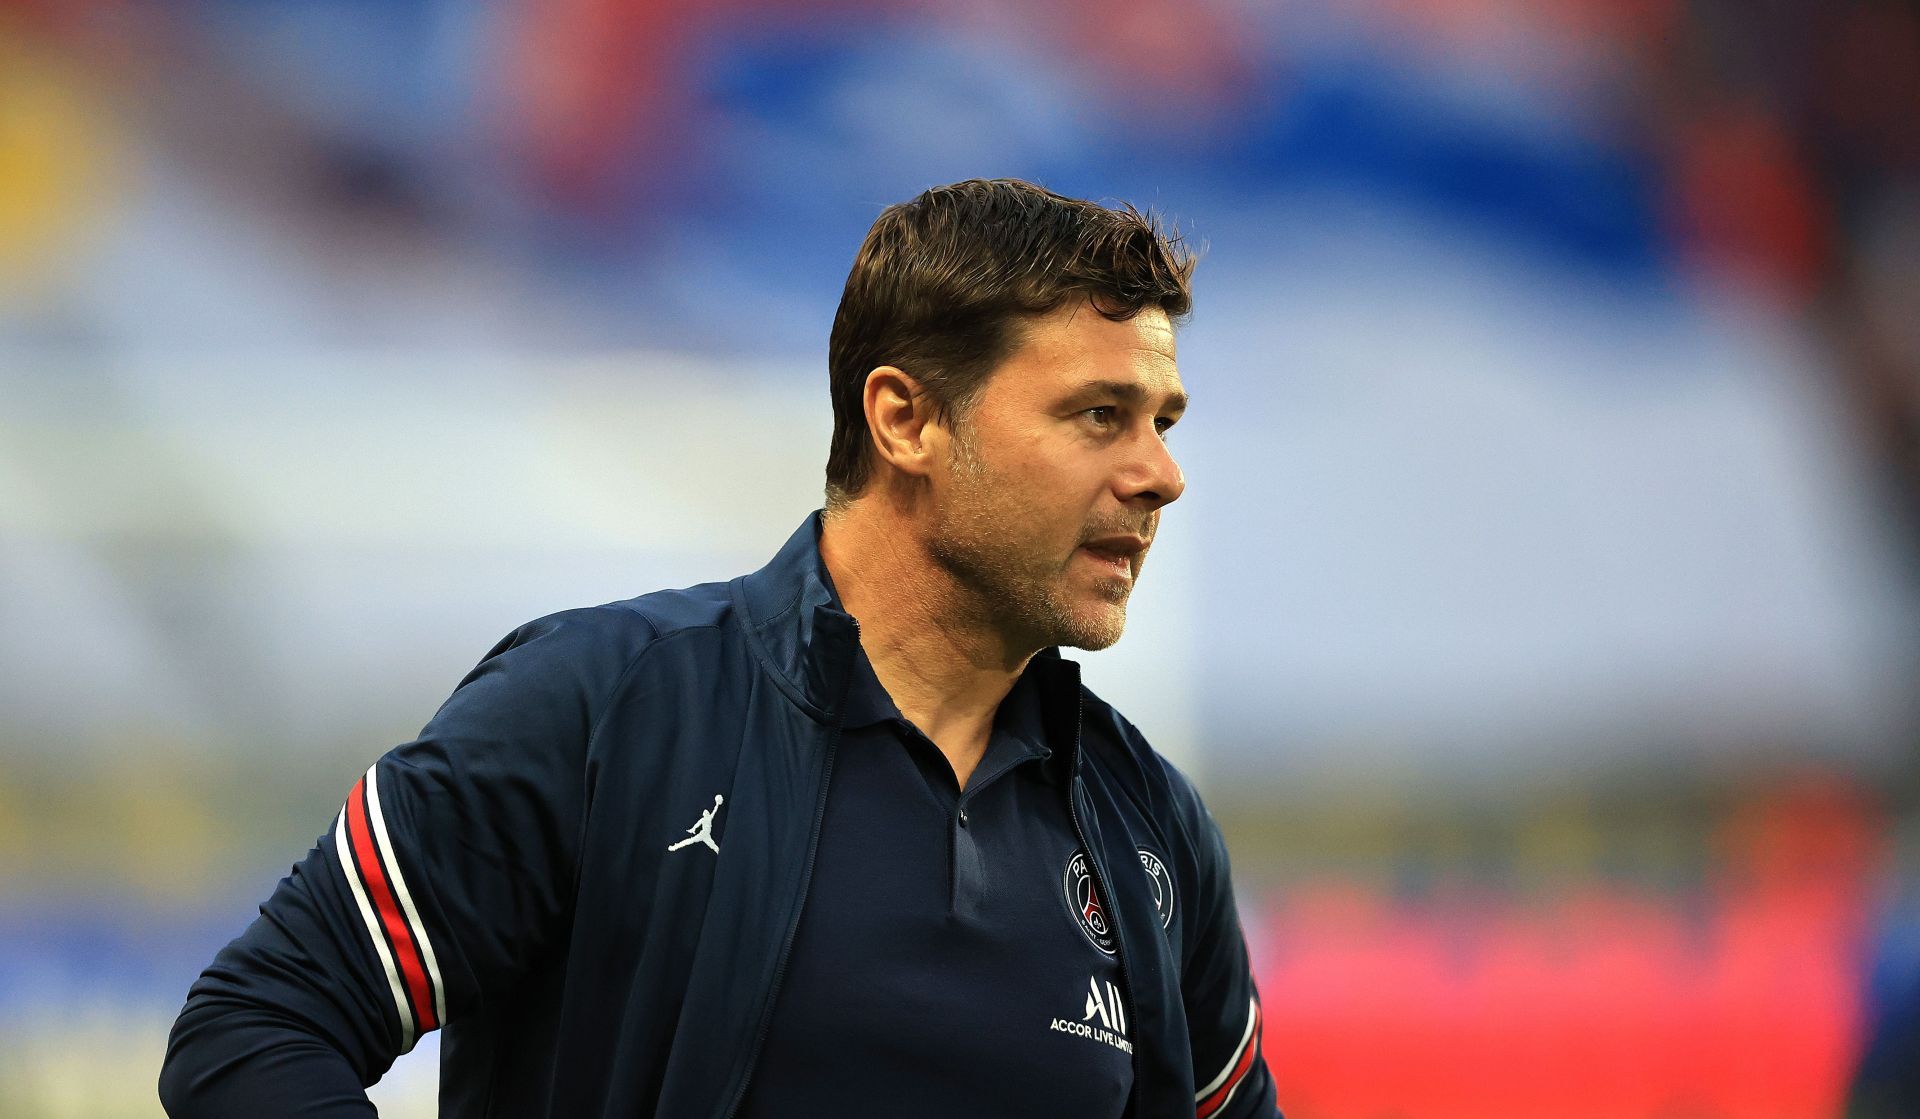 Pochettino has a big job on his hands should he take over